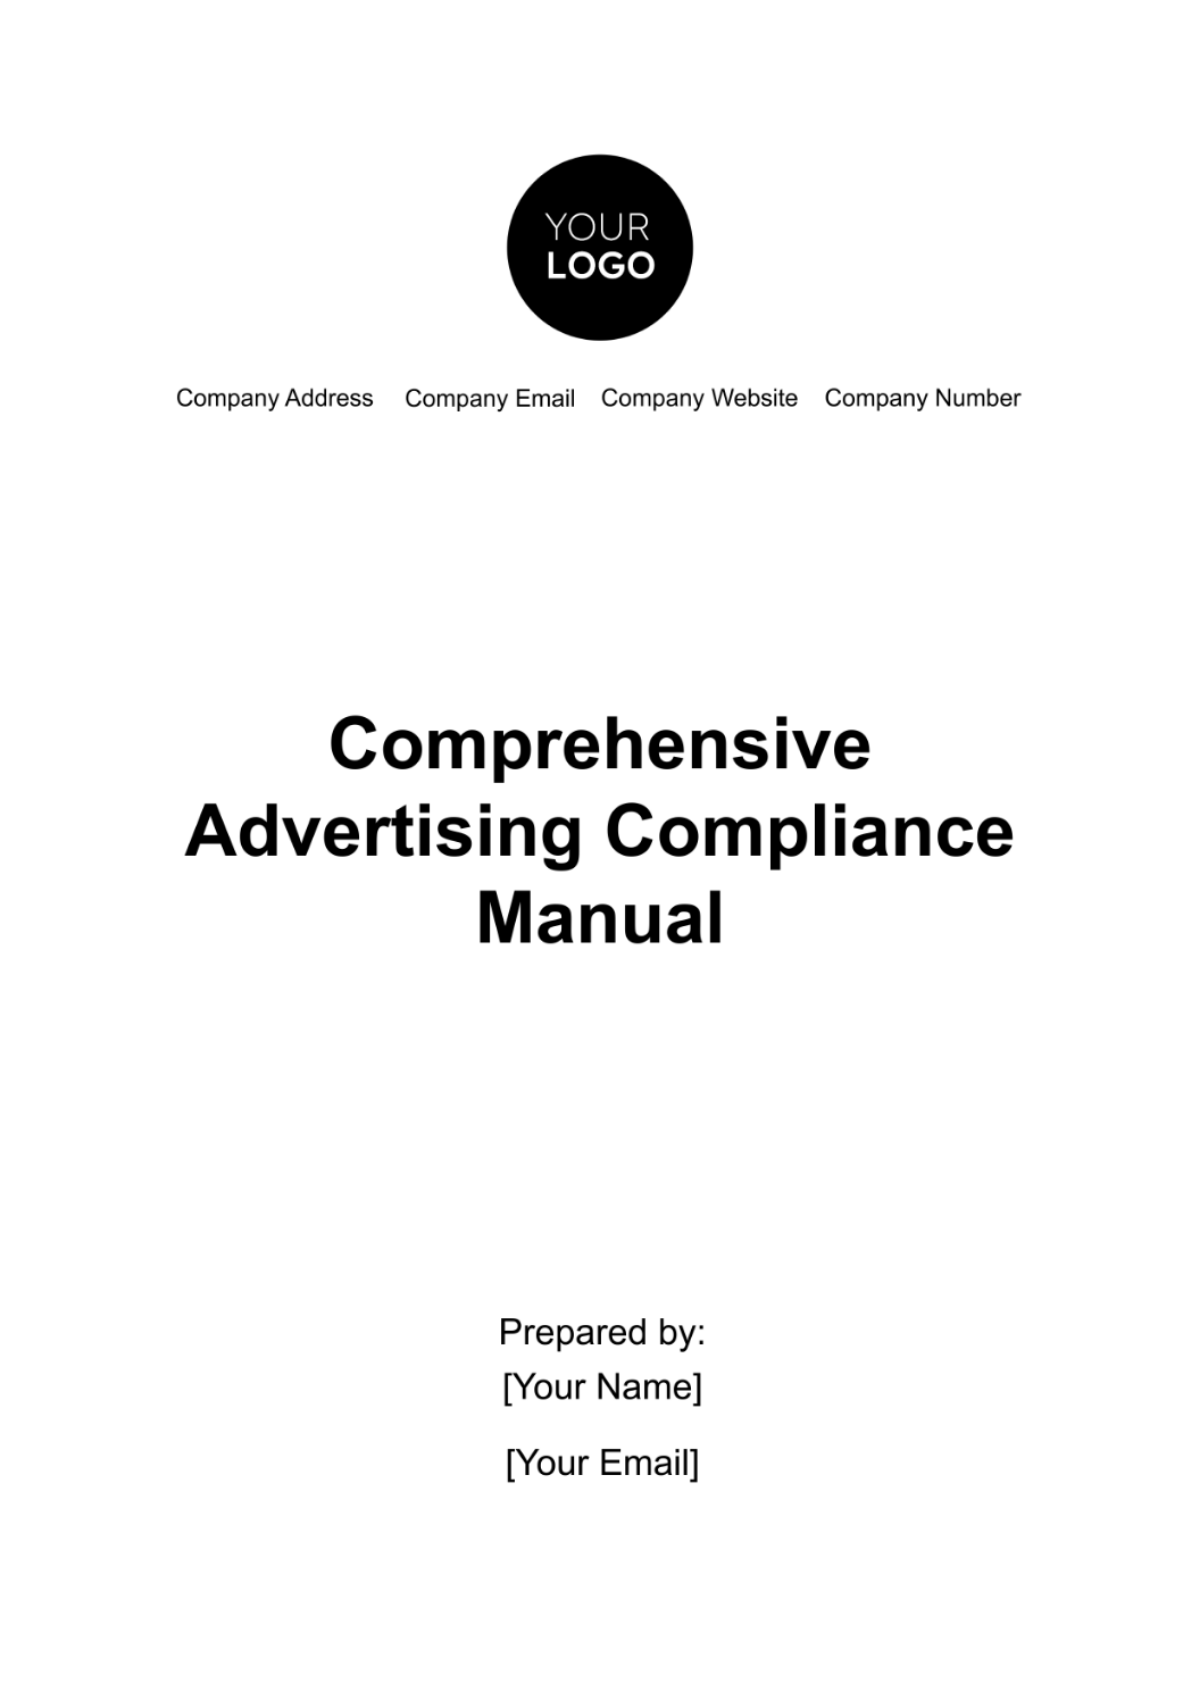 Comprehensive Advertising Compliance Manual Template